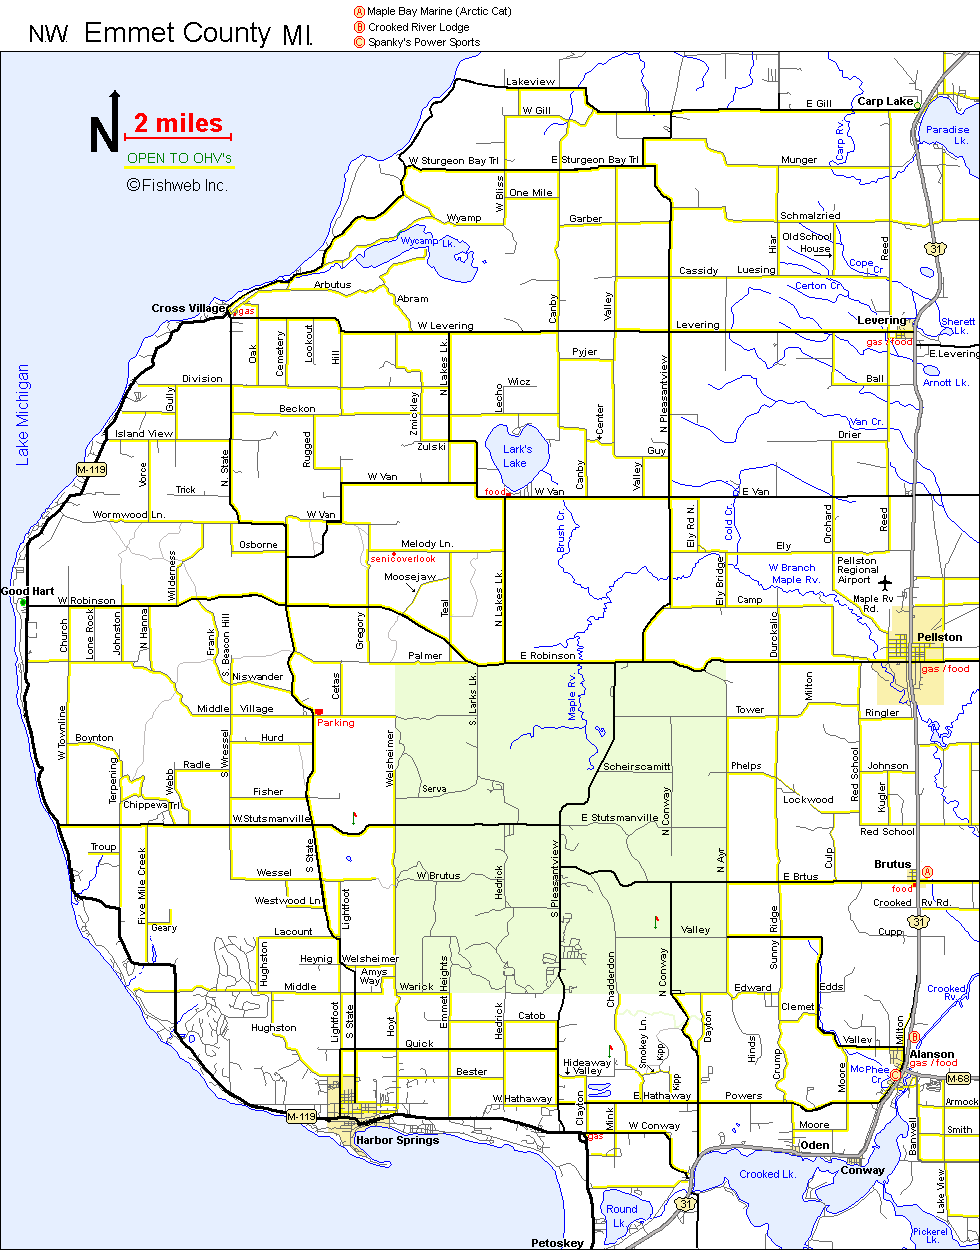 Roads Open to ATV OHV use in Emment County Michigan